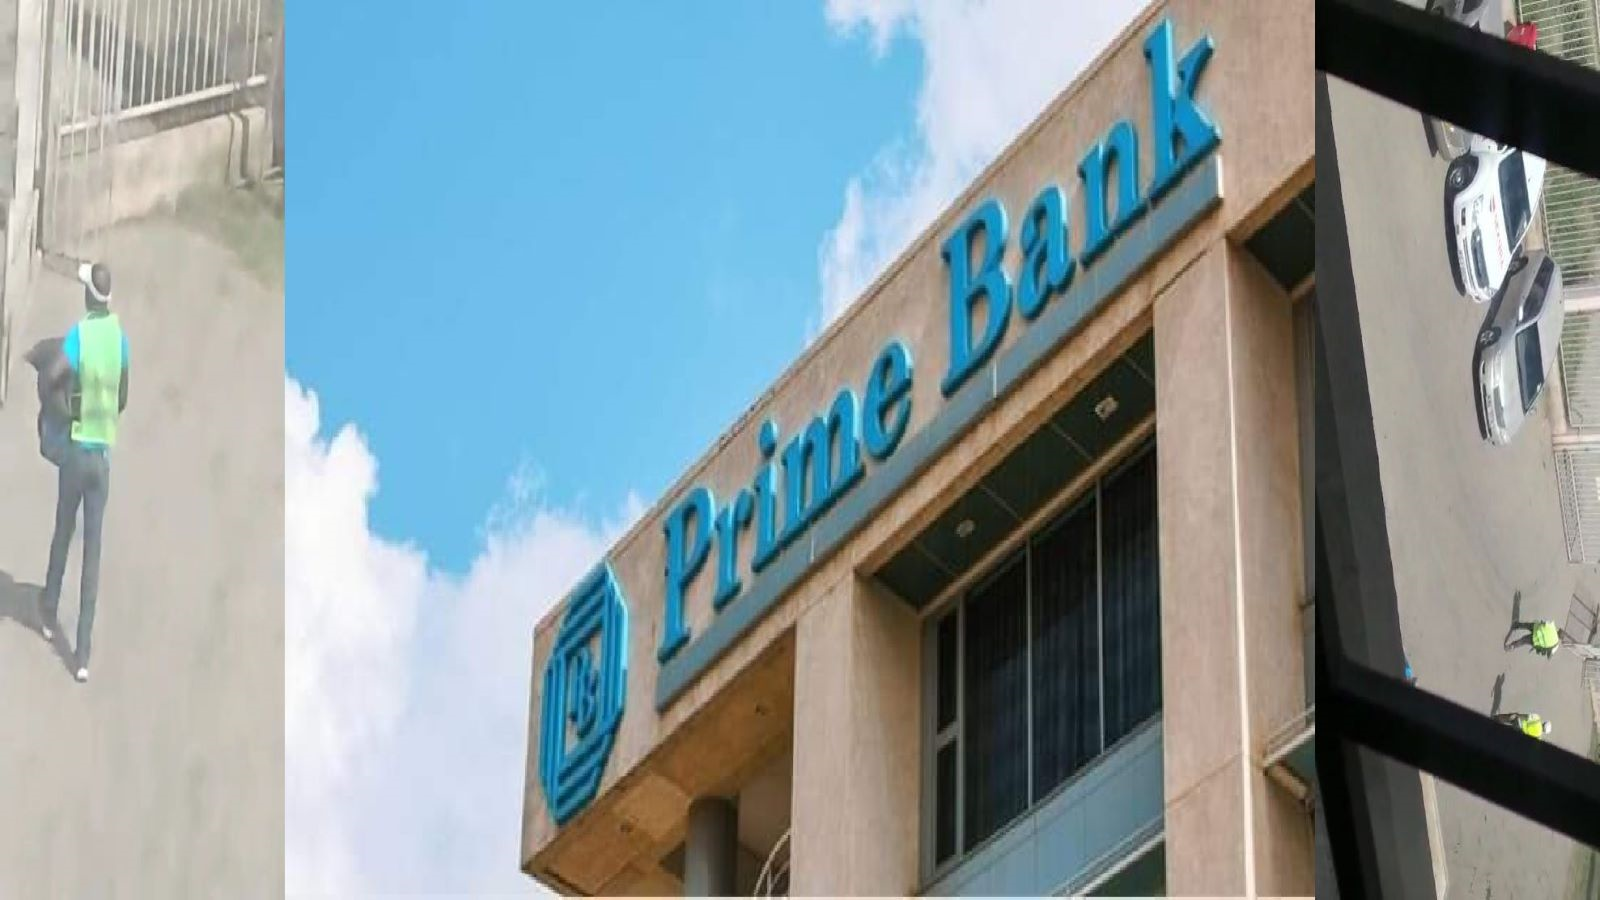 Robbers steal 3.5M at Prime Bank in broad daylight.